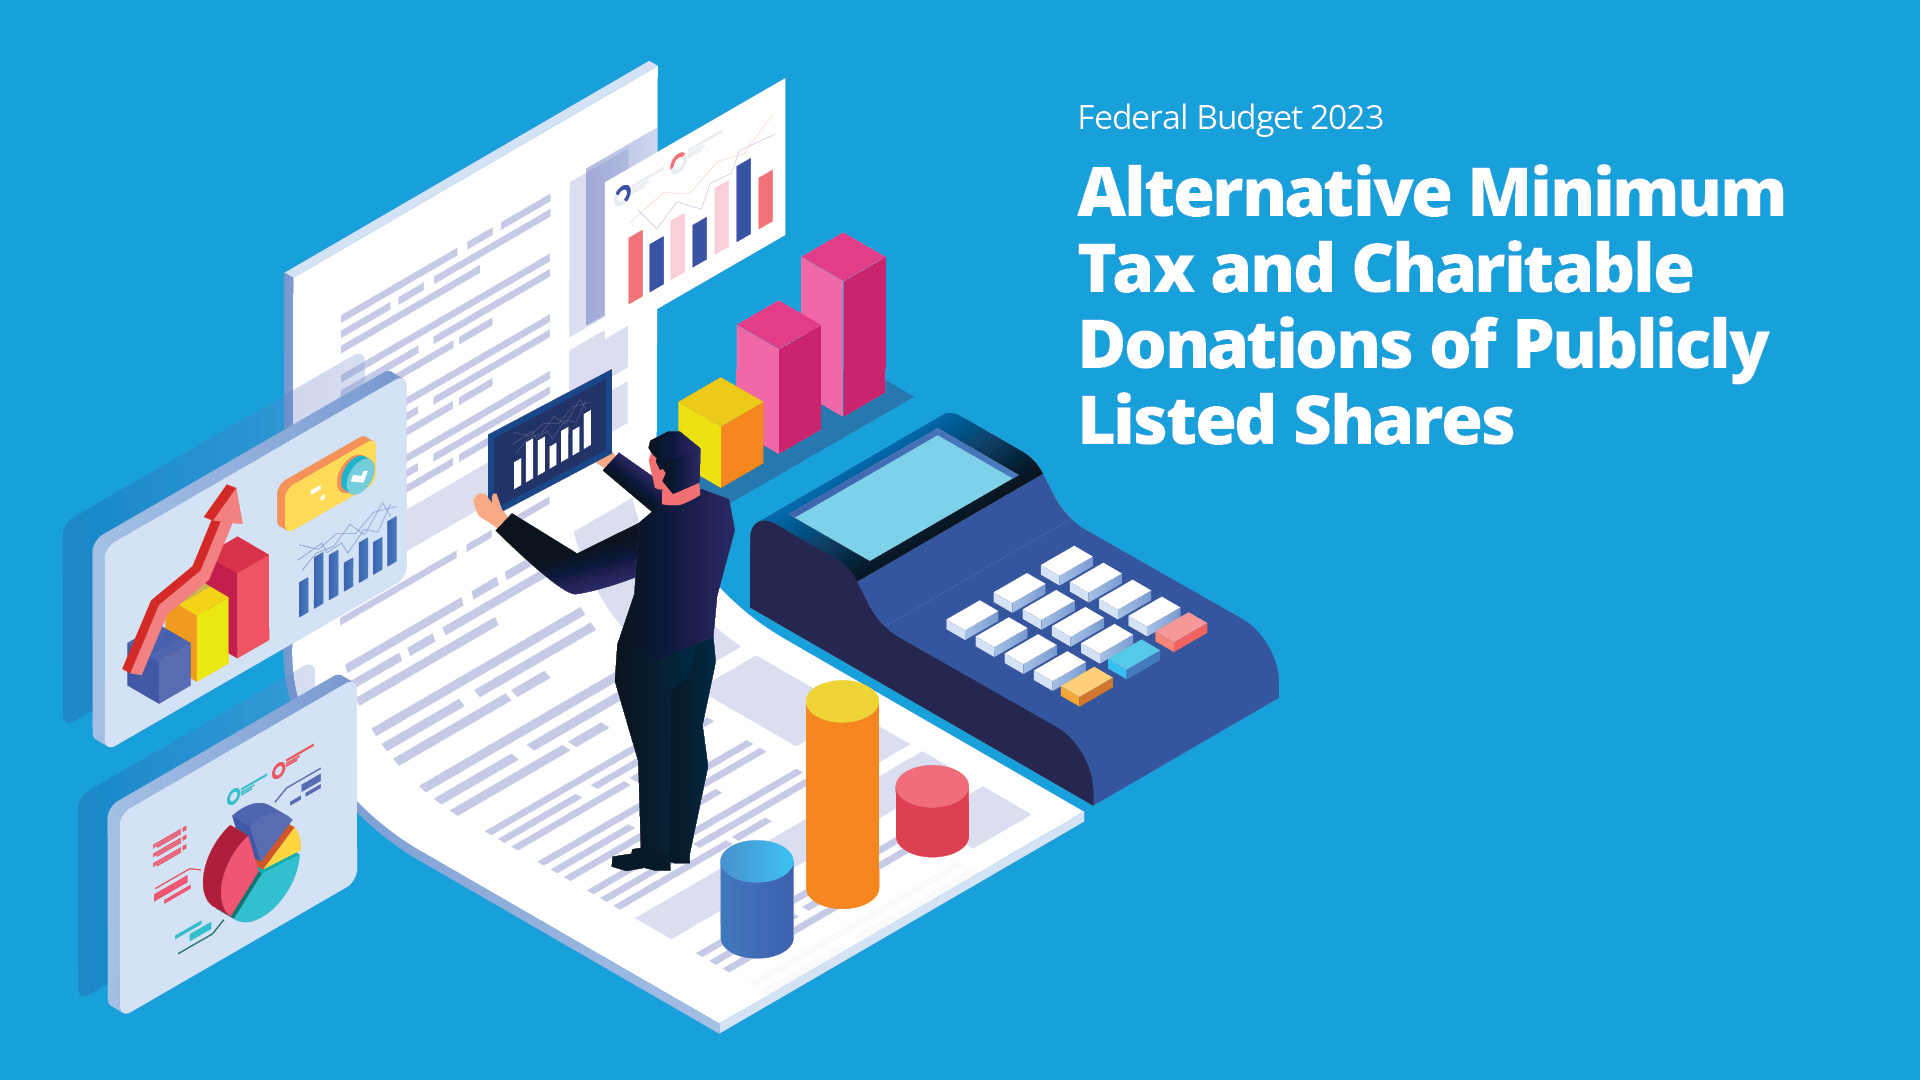 Alternative Minimum Tax and Charitable Donations of Publicly Listed Shares